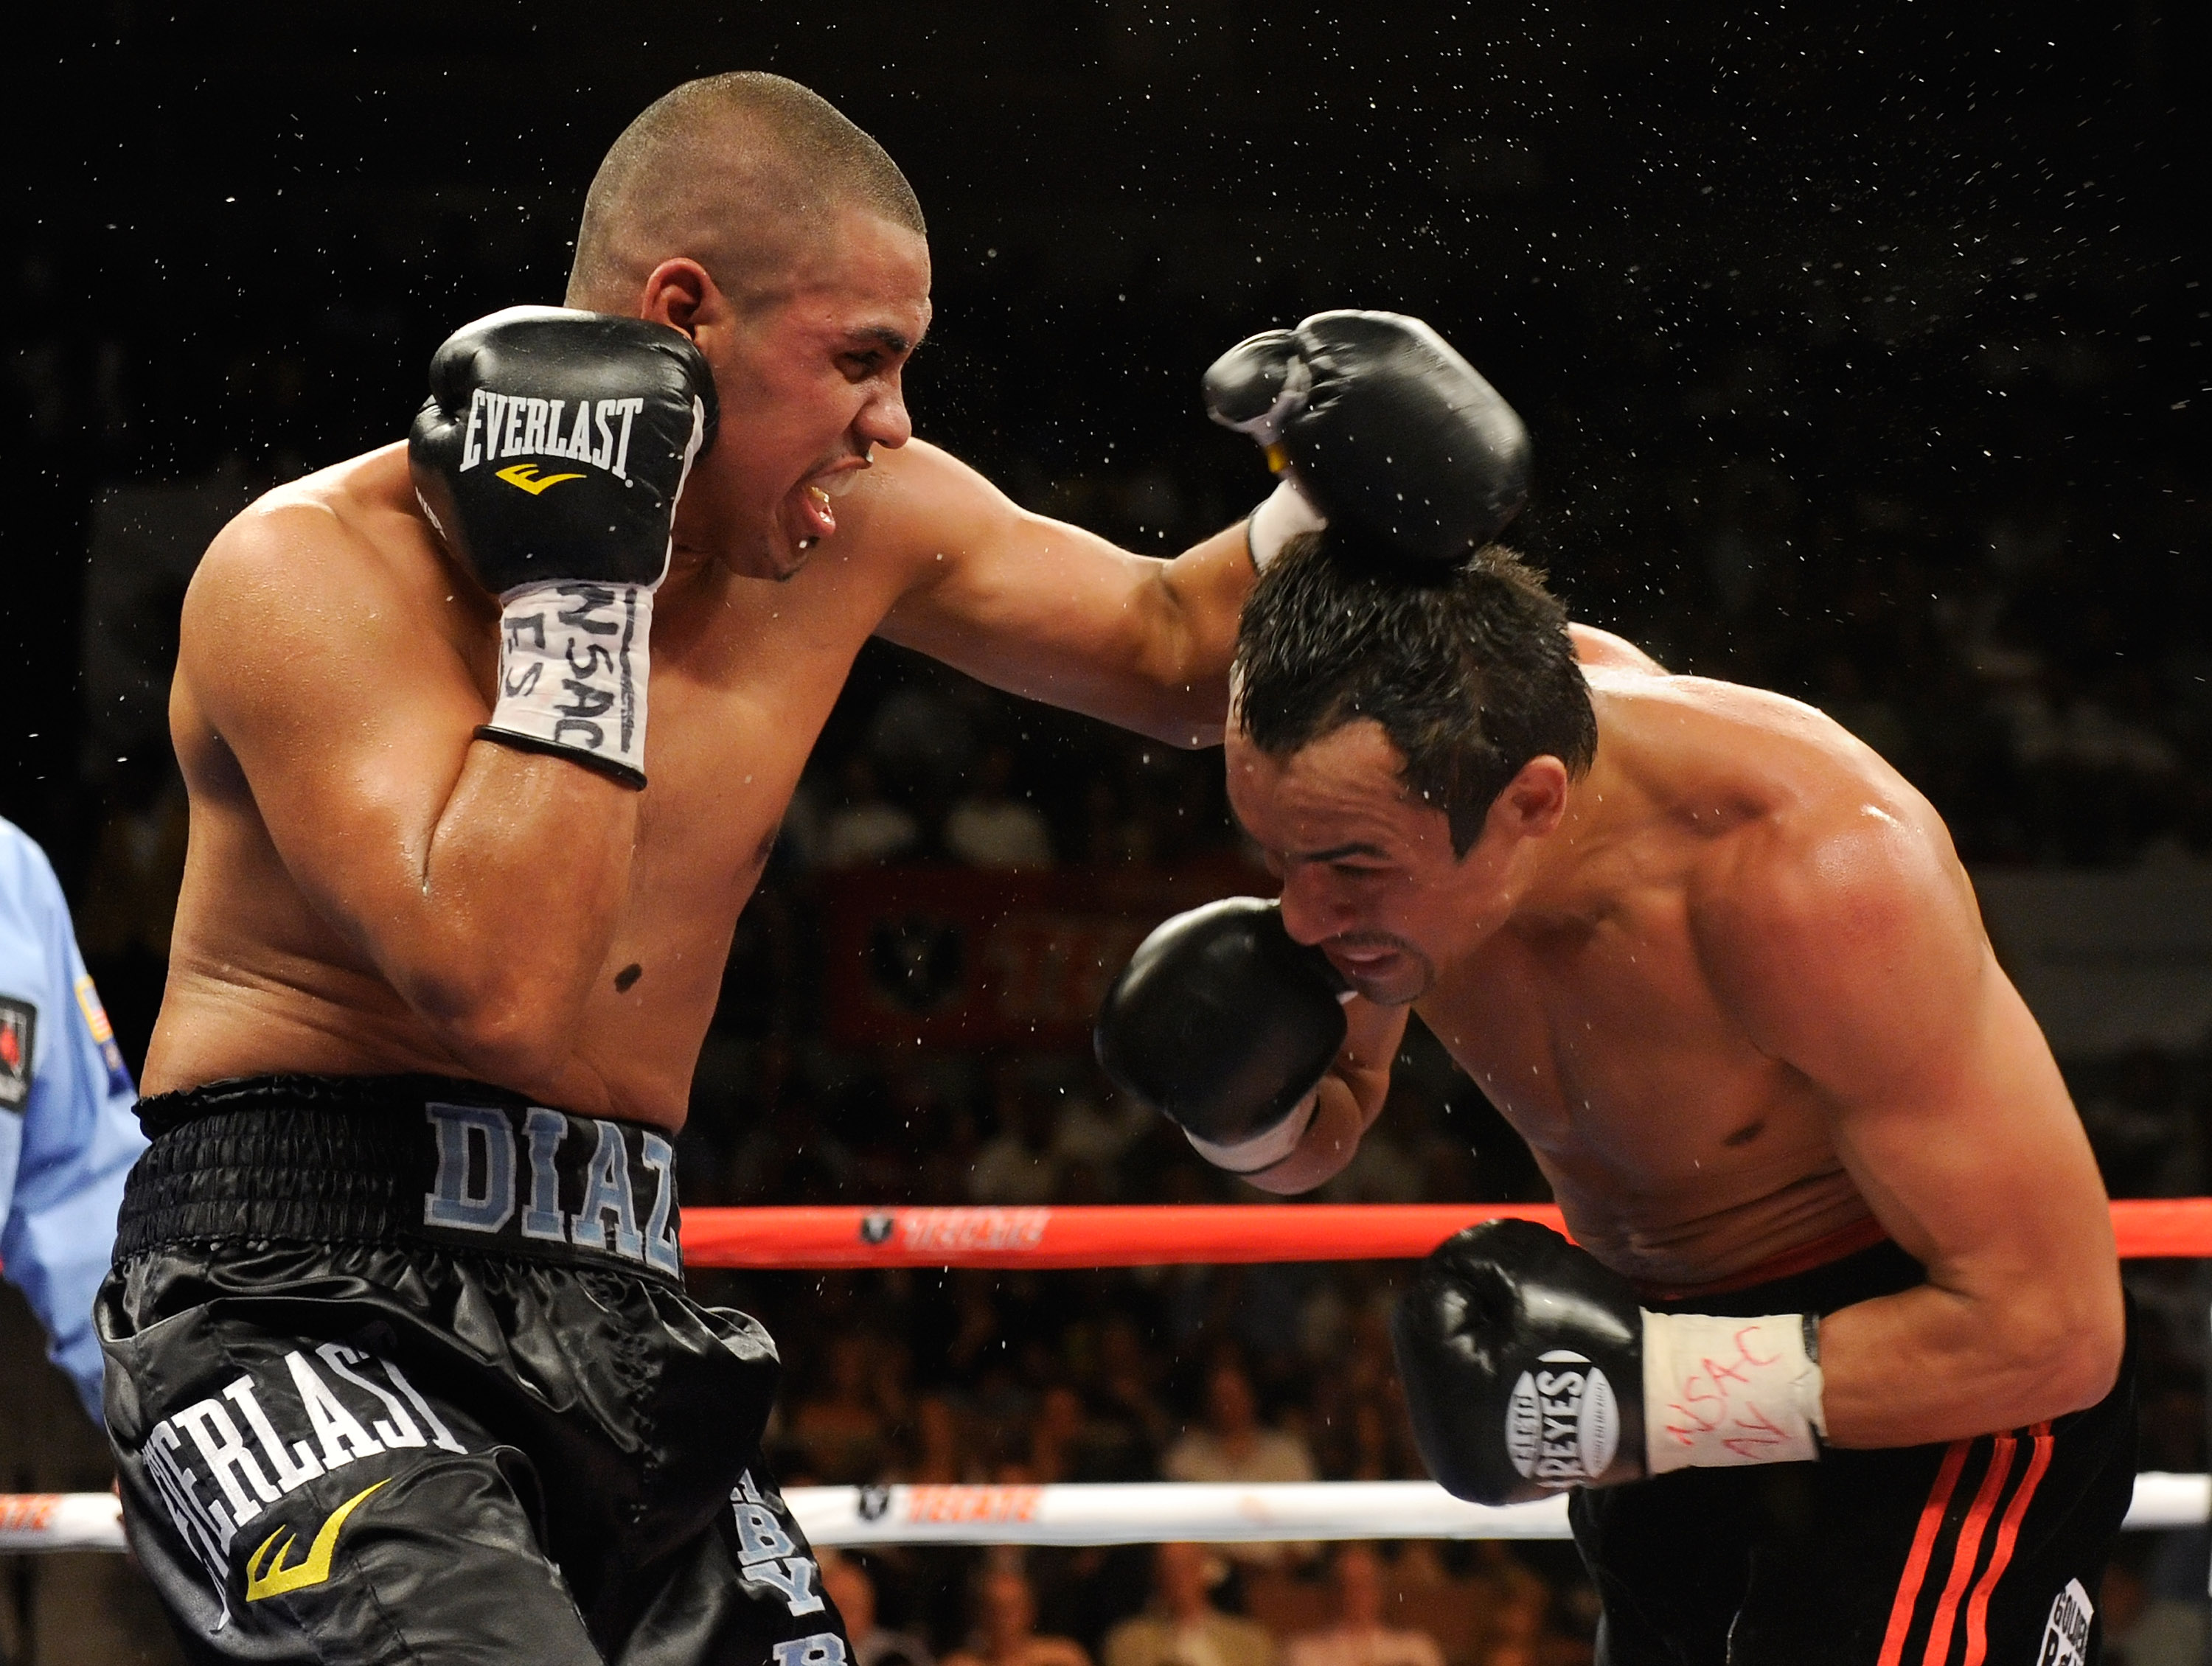 LAS VEGAS - JULY 31:  Juan Diaz (L) hits WBA/WBO lightweight champion Juan Manuel Marquez in the fifth round of their bout at the Mandalay Bay Events Center July 31, 2010 in Las Vegas, Nevada. Marquez retained his WBA and WBO lightweight championship belt